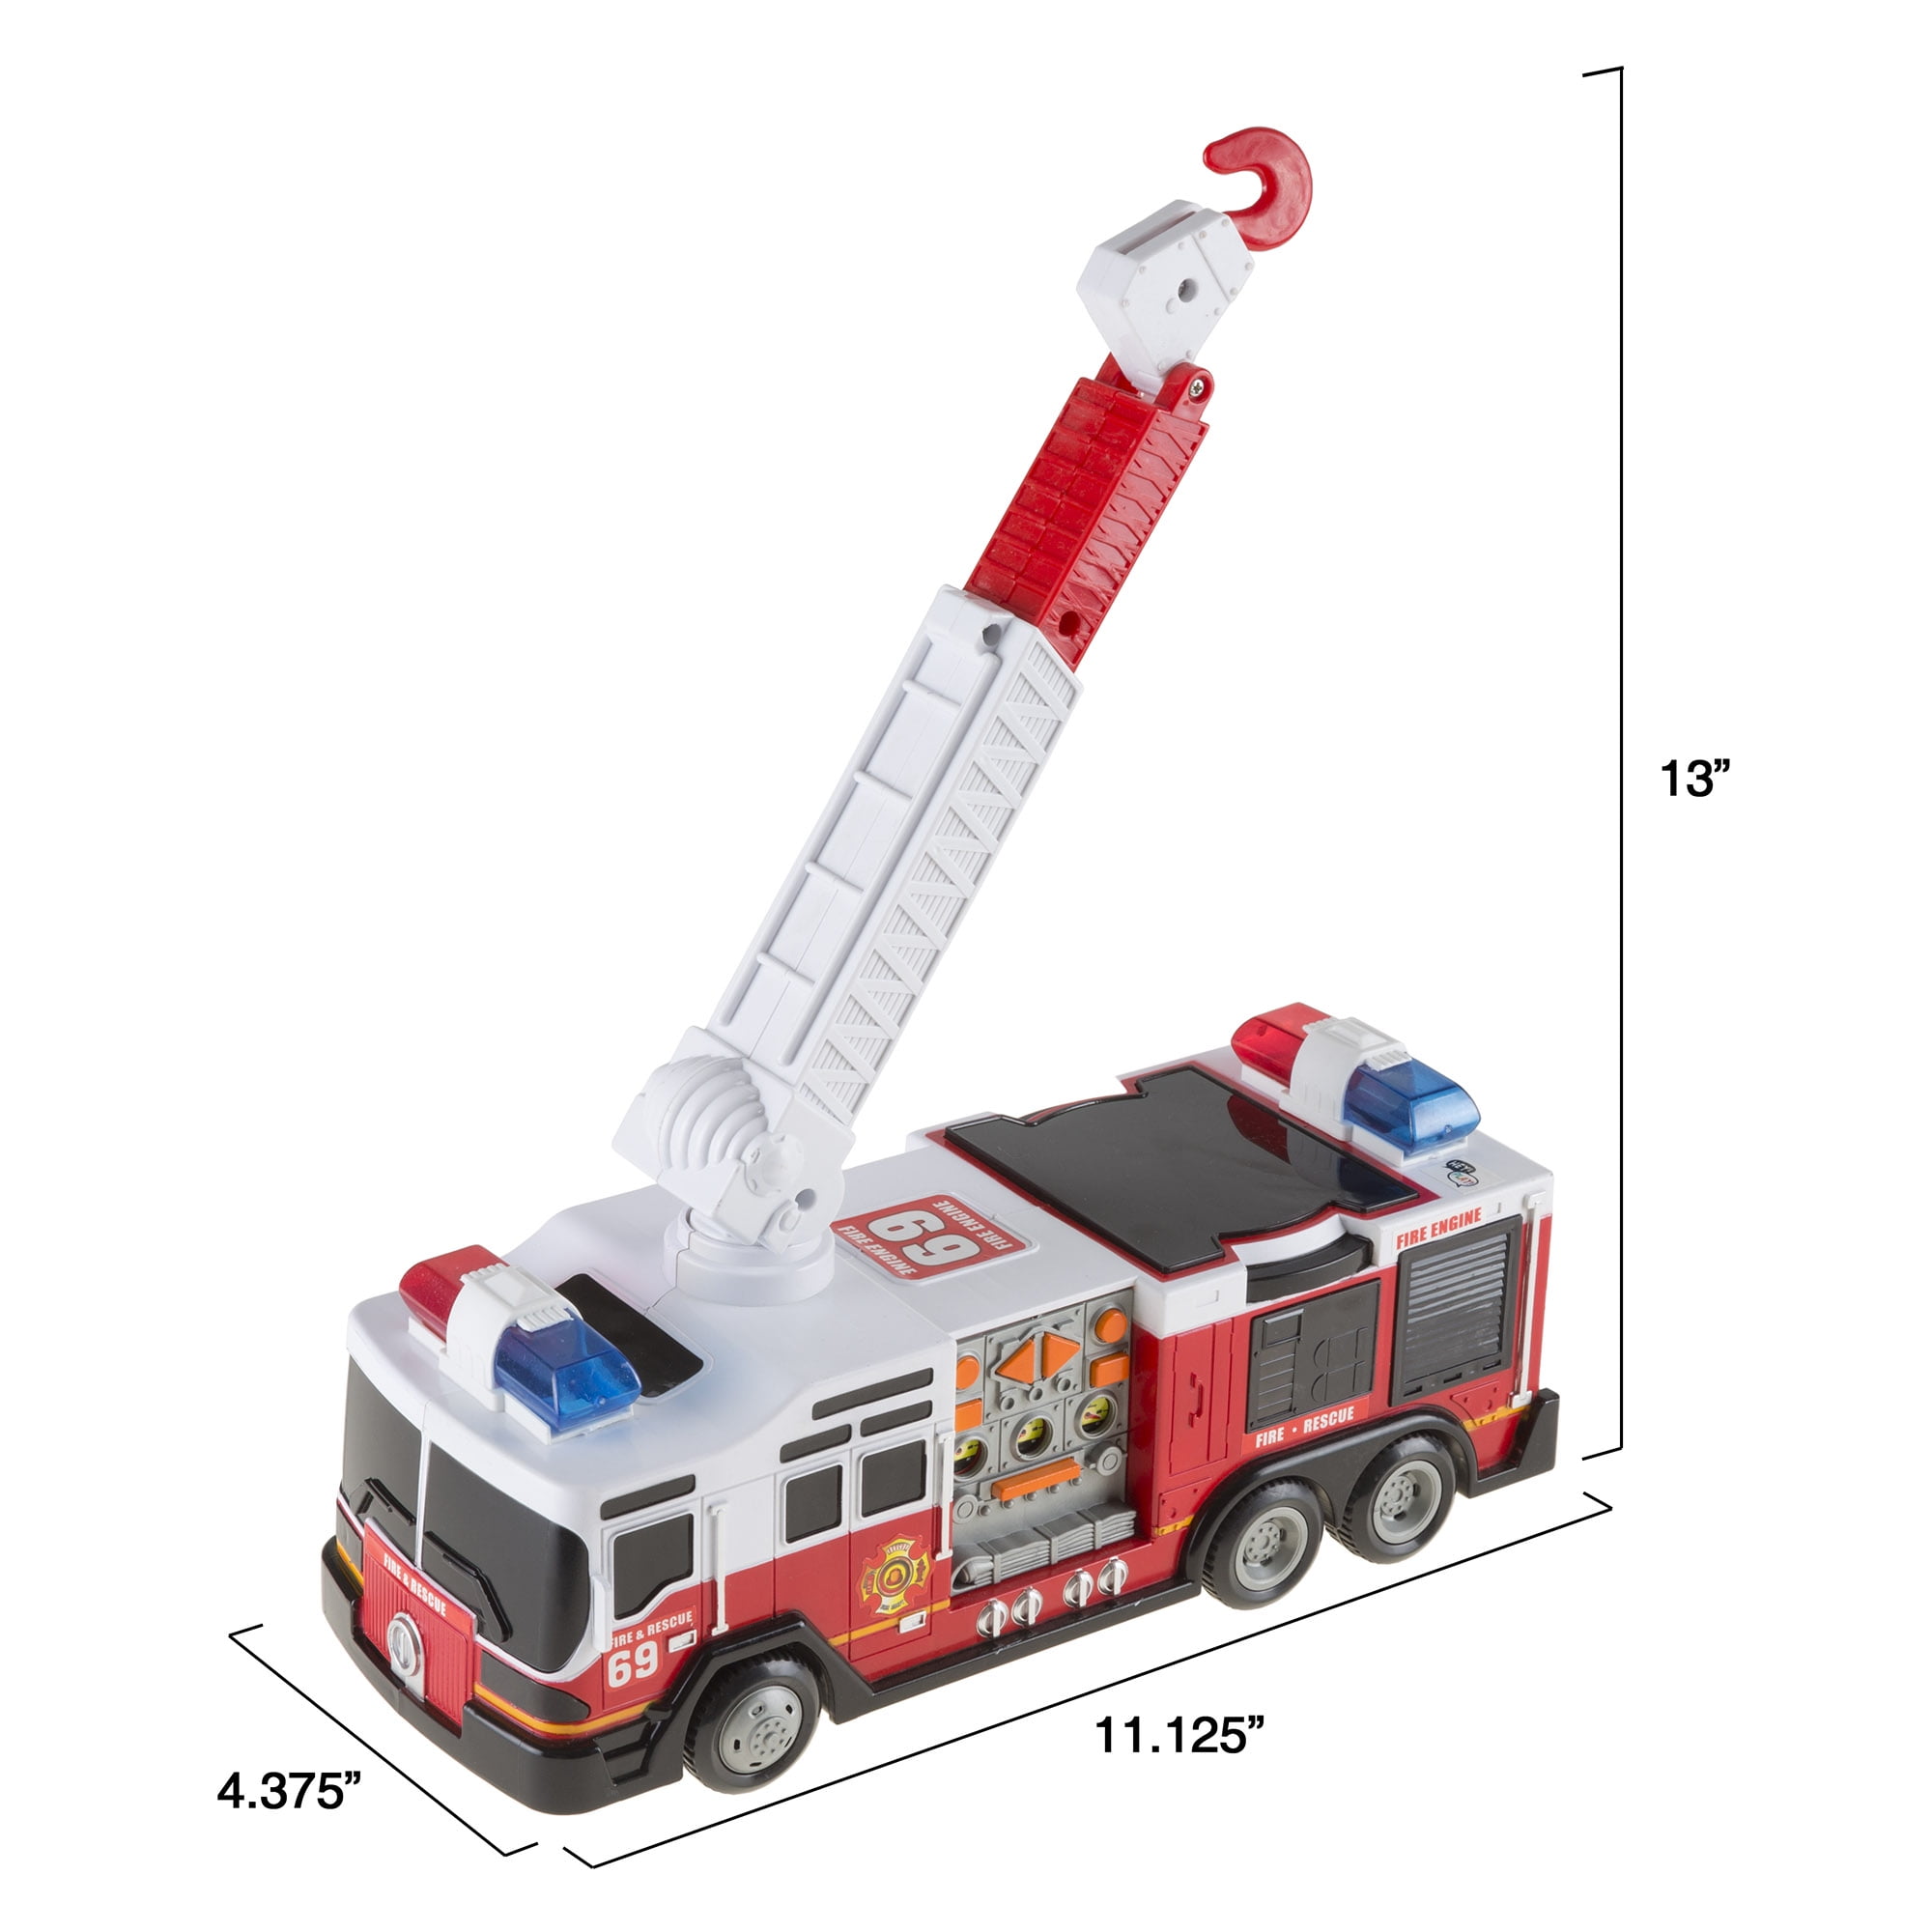 Long Ladder Big Fire Truck Toy Fire Vehicle With Lights And Sounds Kids Toy Gift 